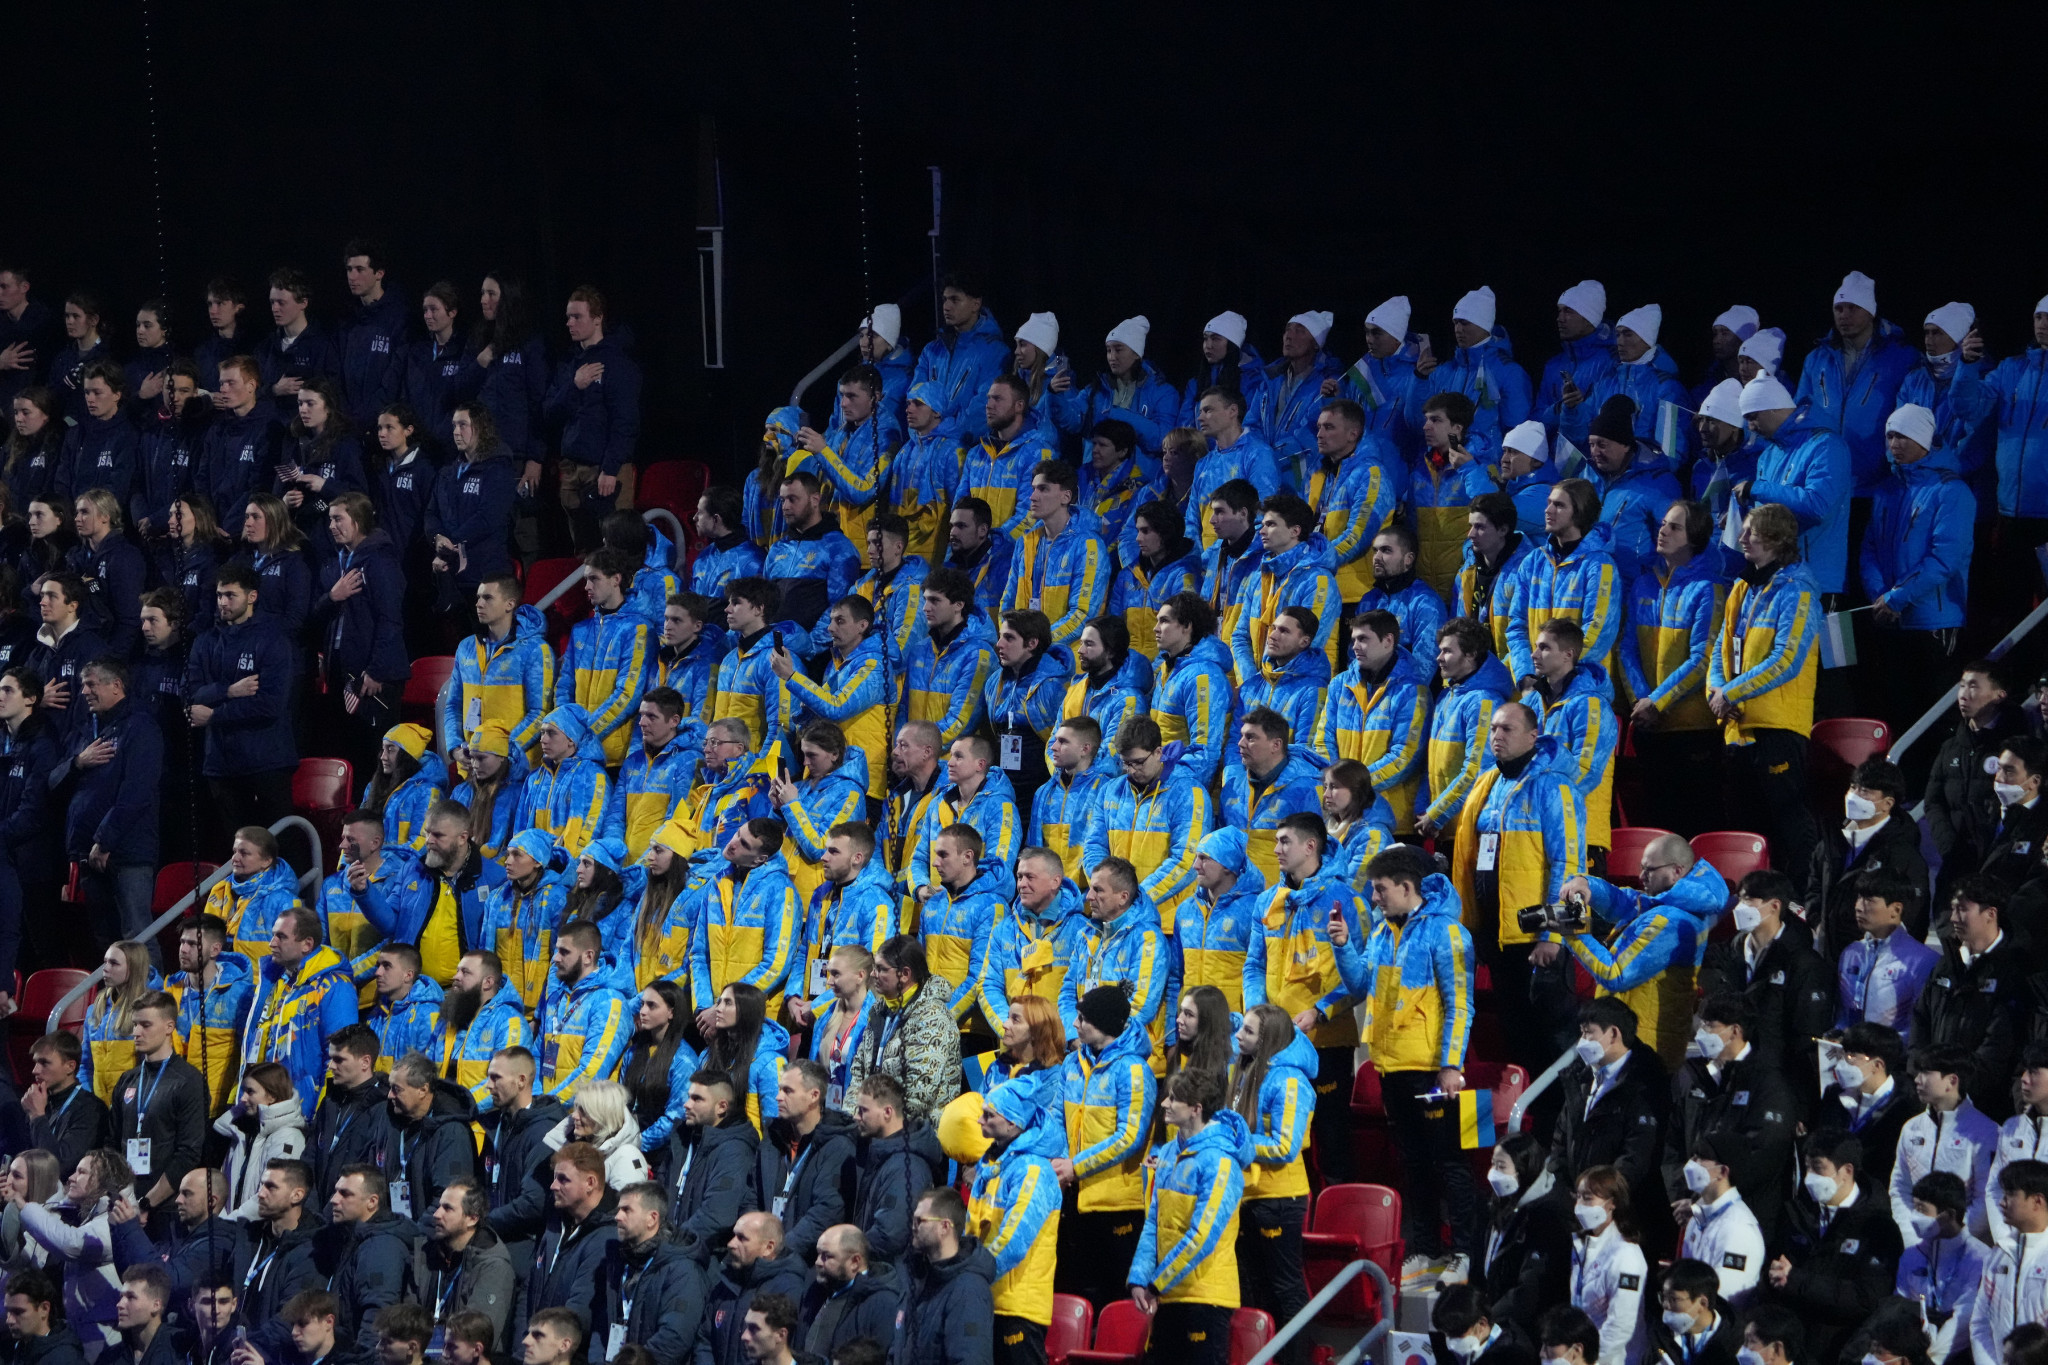 War-stricken Ukraine has managed to send an athlete delegation of 58 while Russia has been banned from the event alongside Belarus ©FISU